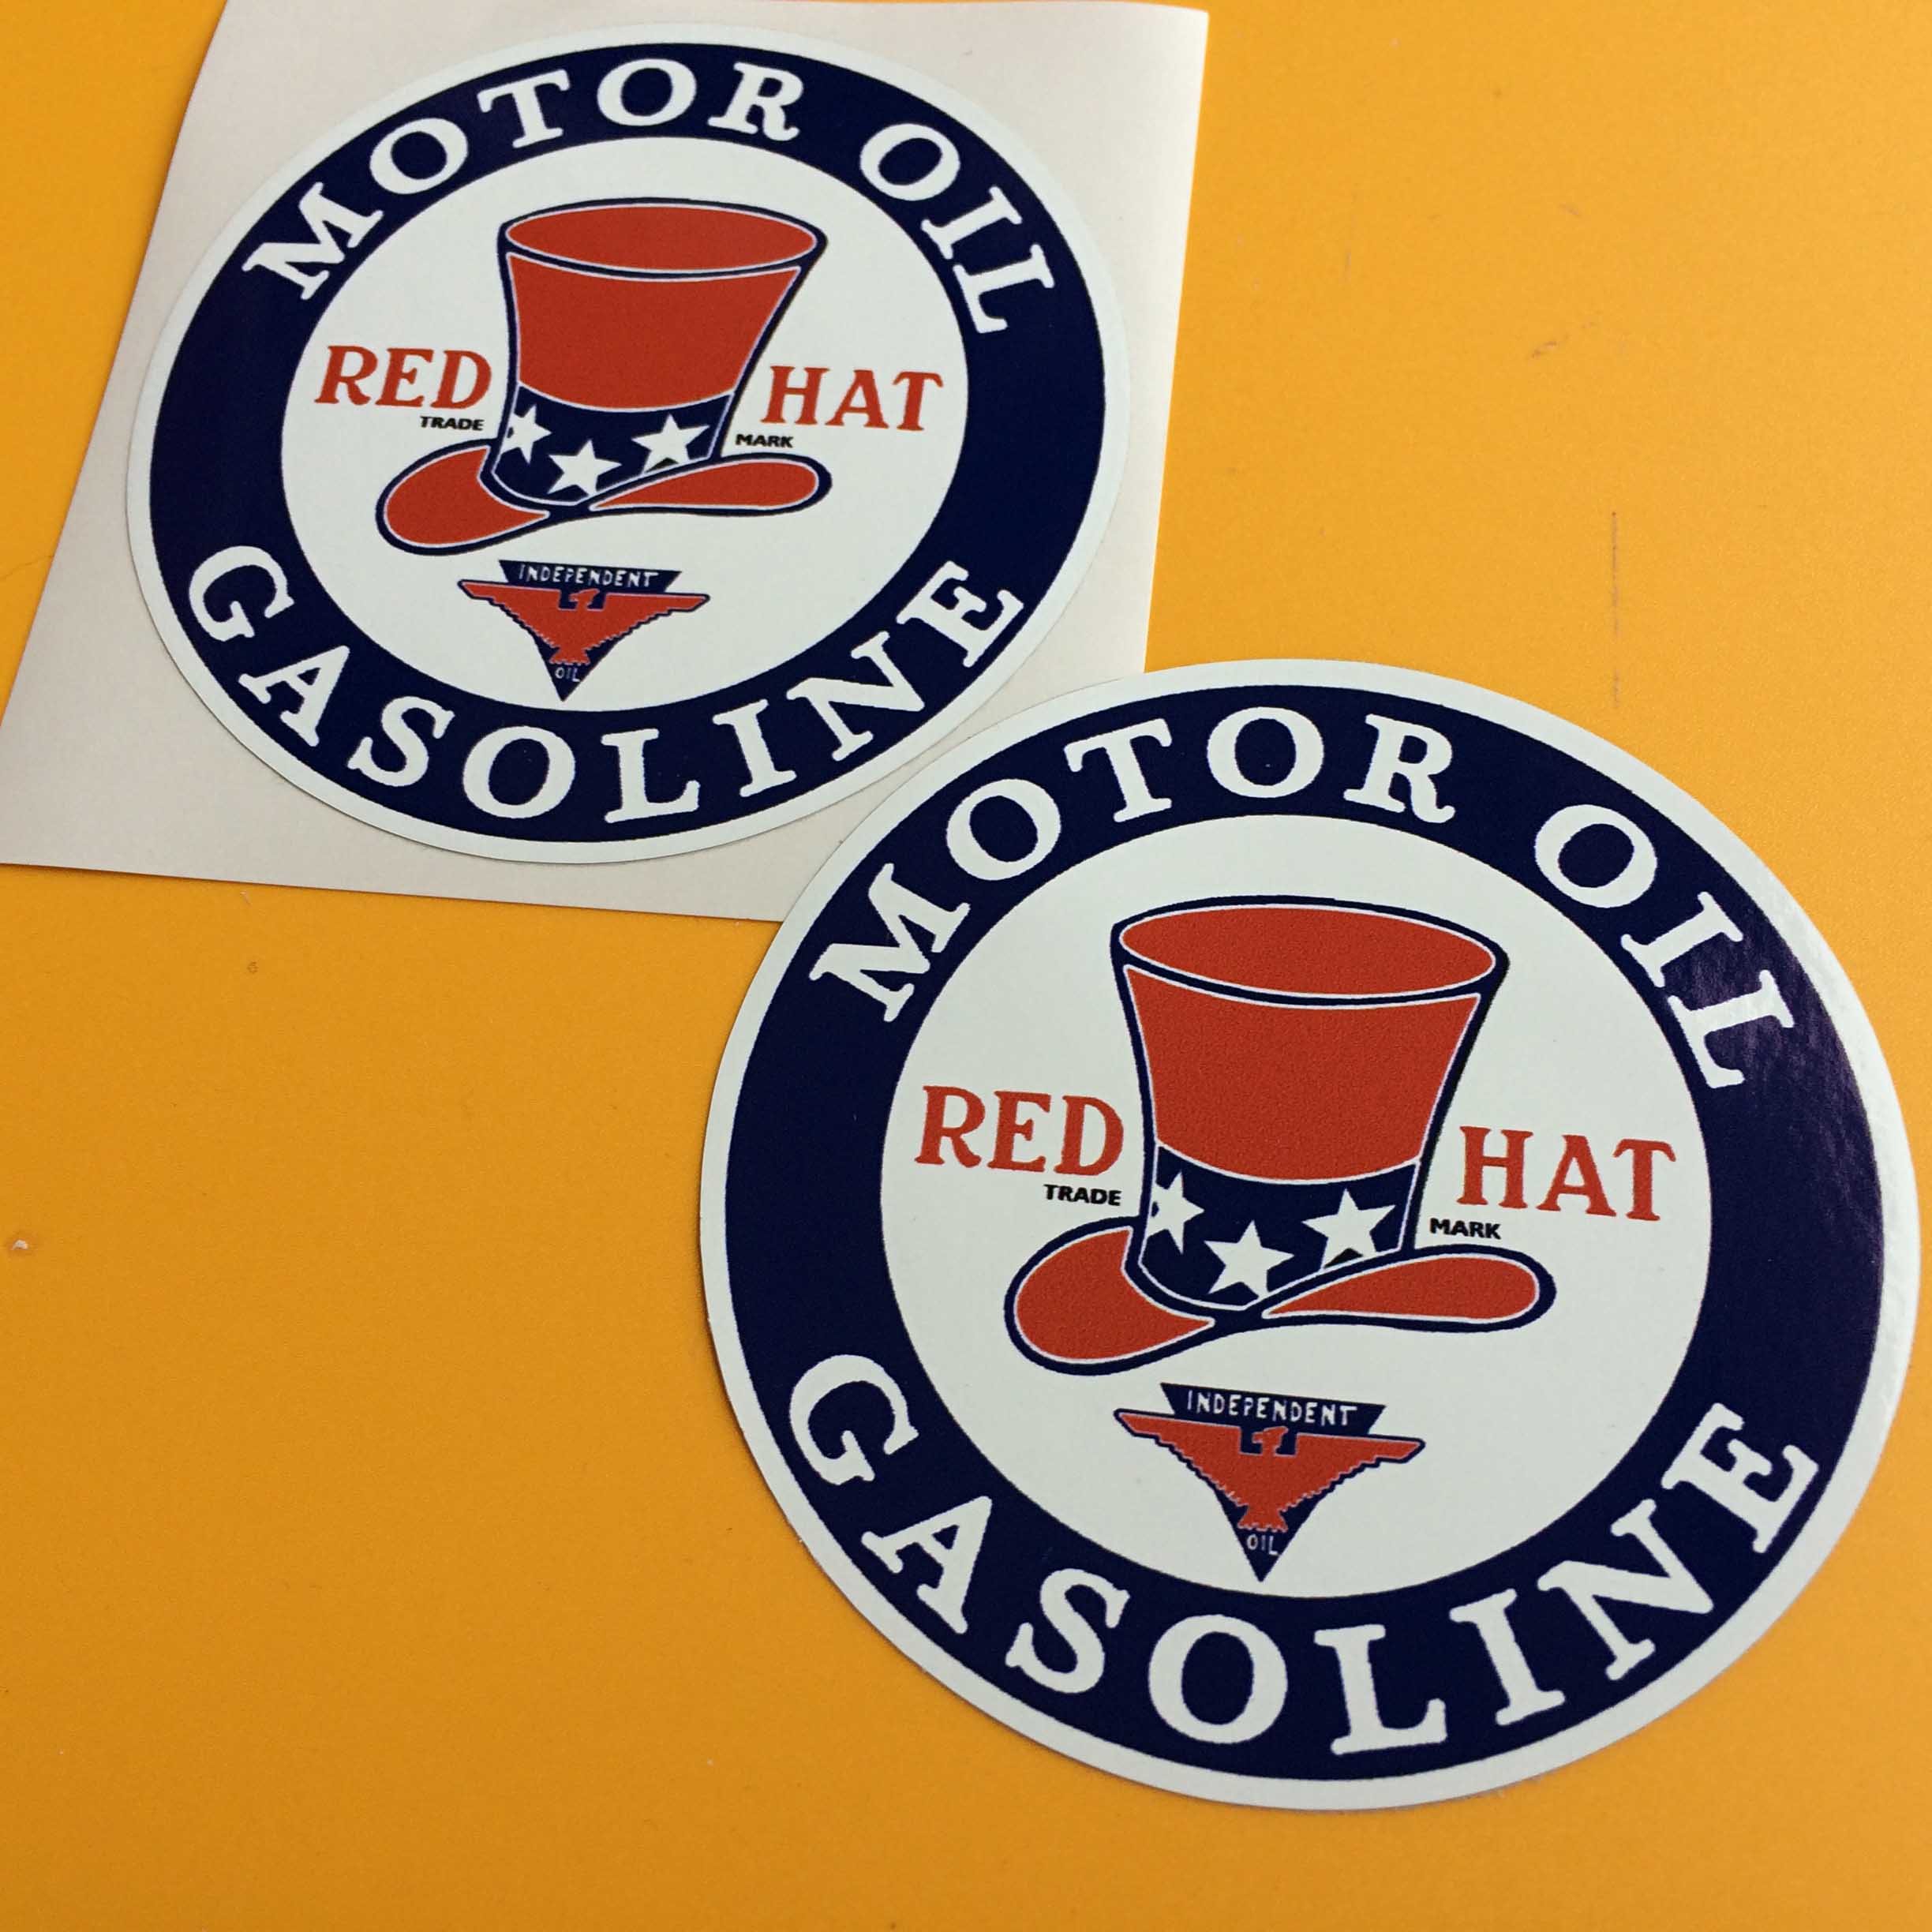 RED HAT MOTOR OIL GASOLINE STICKERS. Red Hat Motor Oil Gasoline surrounds a patriotic top hat inside two concentric circles of blue and white. Below the hat is a red eagle and Independent Oil on a blue flipped triangle.